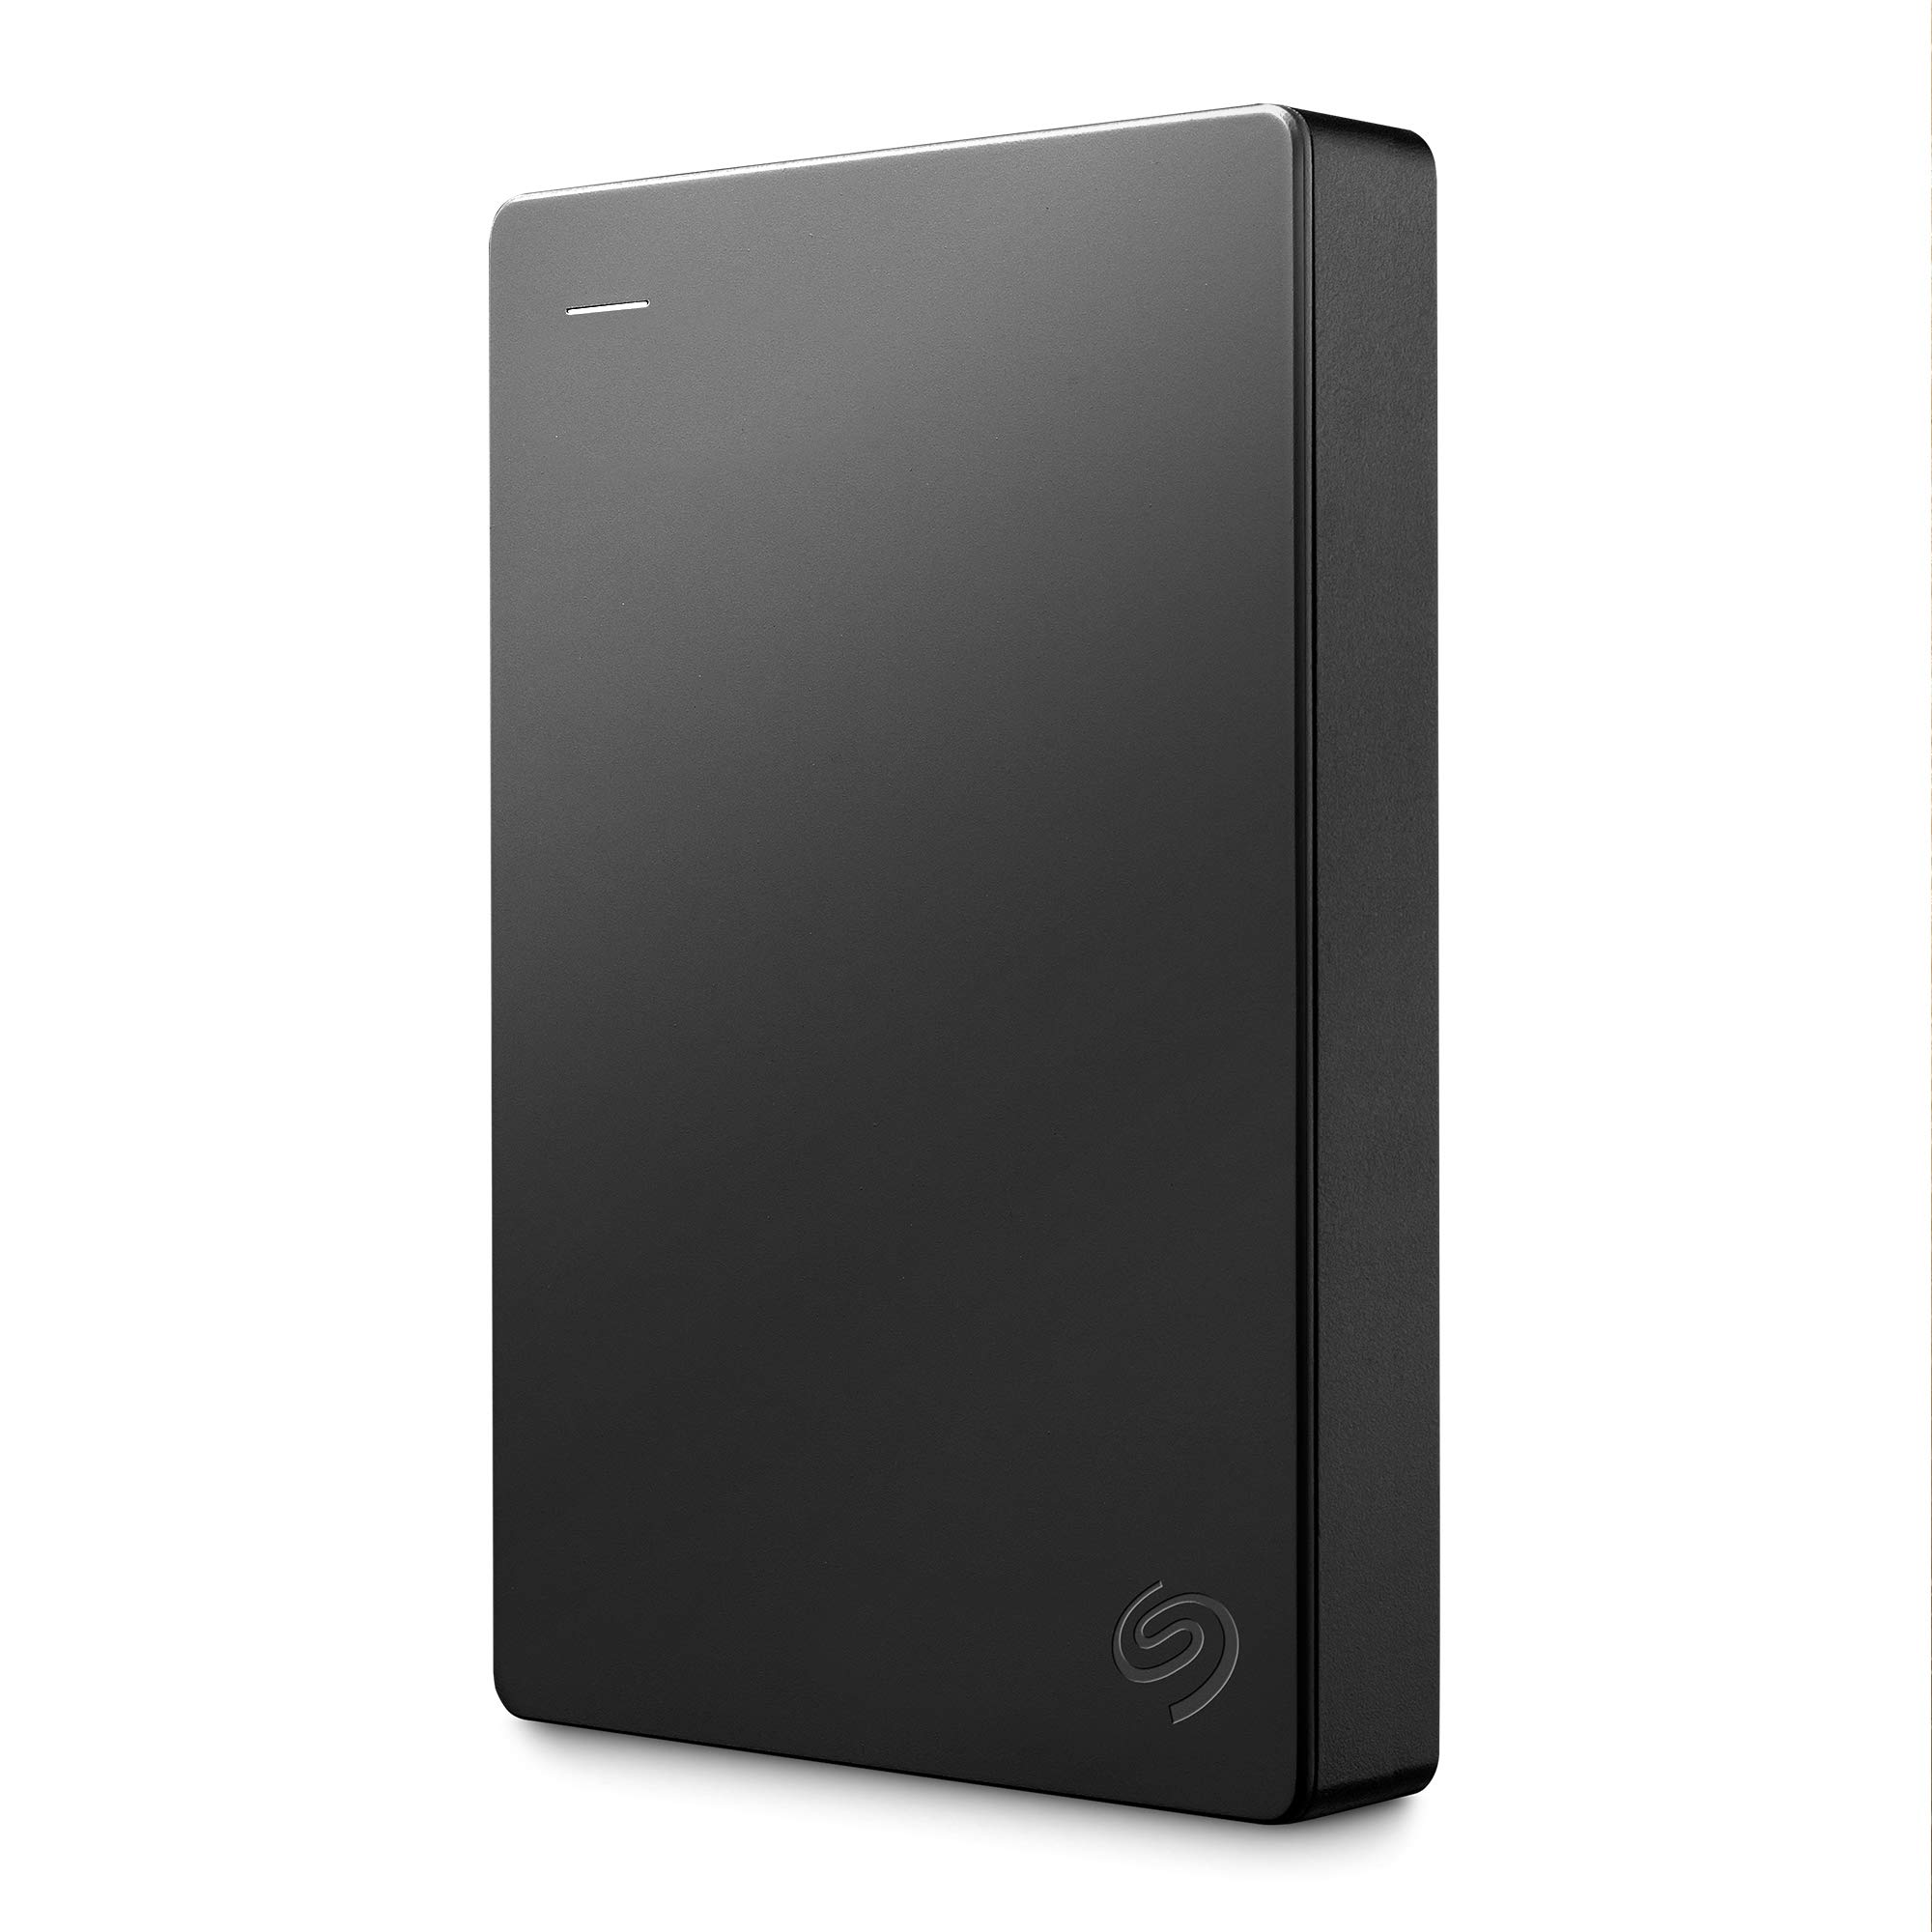 Seagate Portable 4TB External Hard Drive HDD – USB 3.0 for PC, Mac, Xbox, & Playstation & (STGD2000100) Game Drive for PS4 Systems 2TB External Hard Drive Portable HDD â€“ USB 3.0